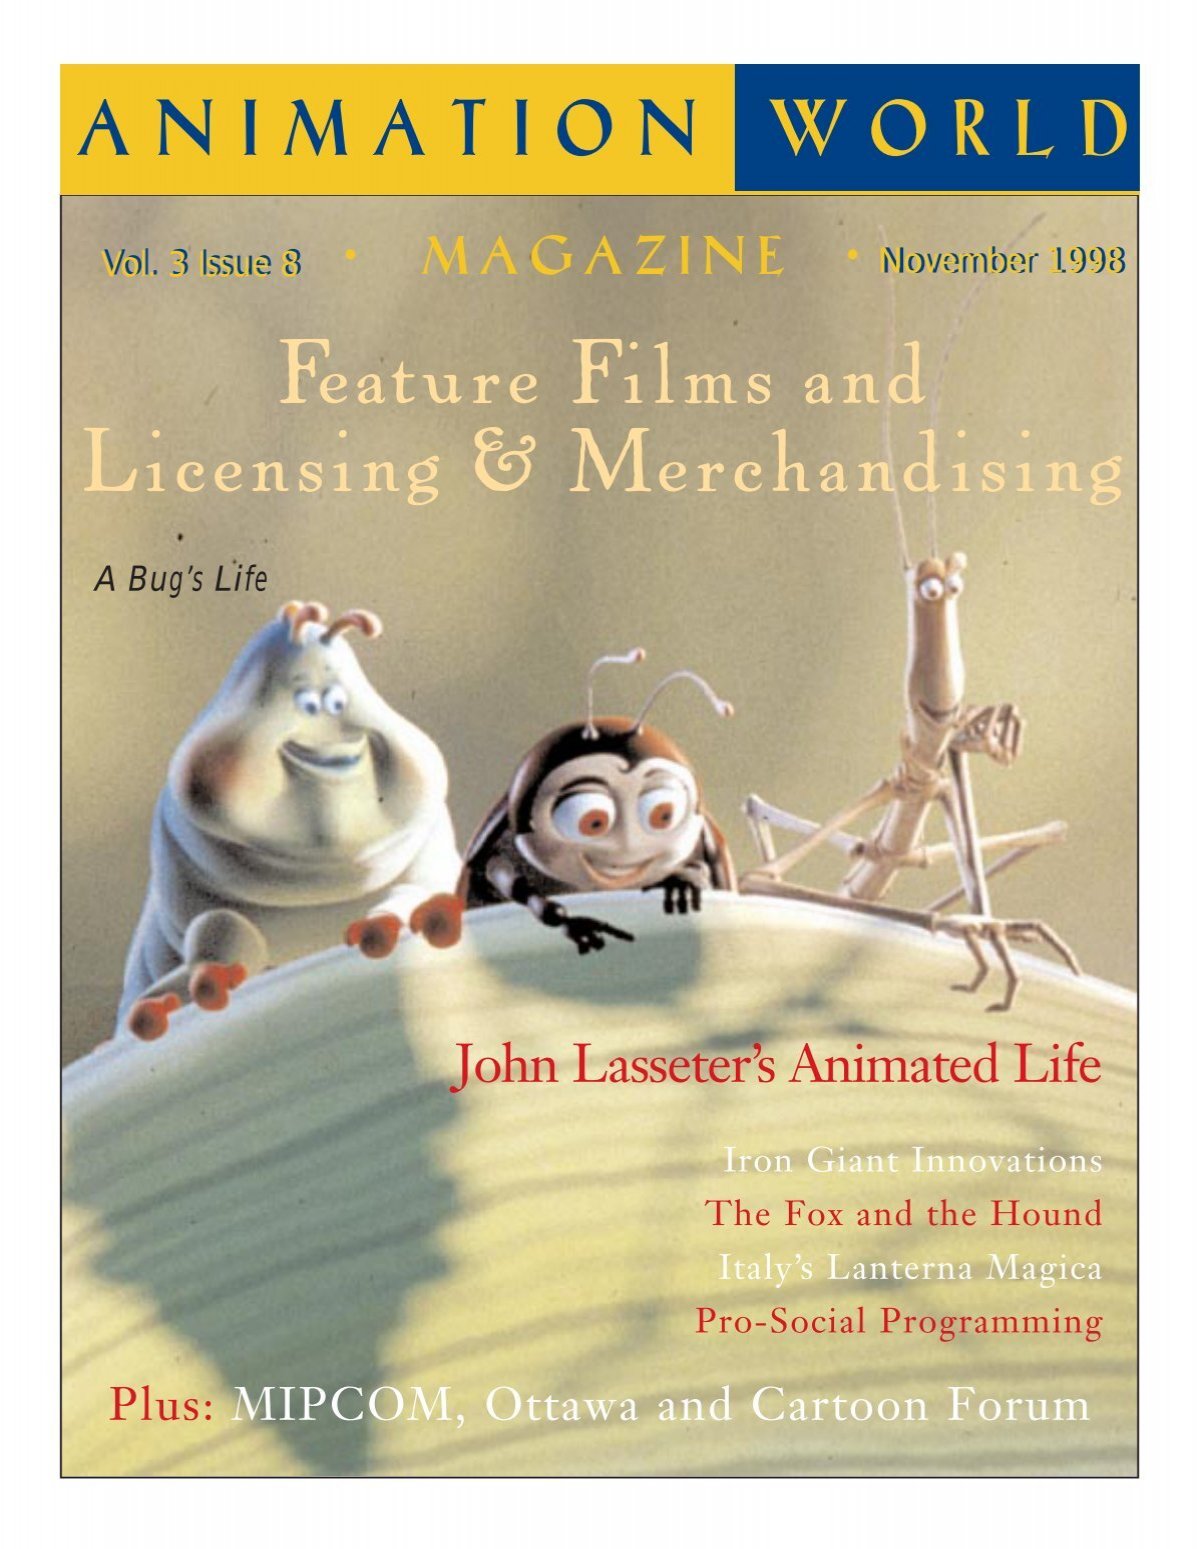 Feature Films and Licensing & Merchandising - Animation World